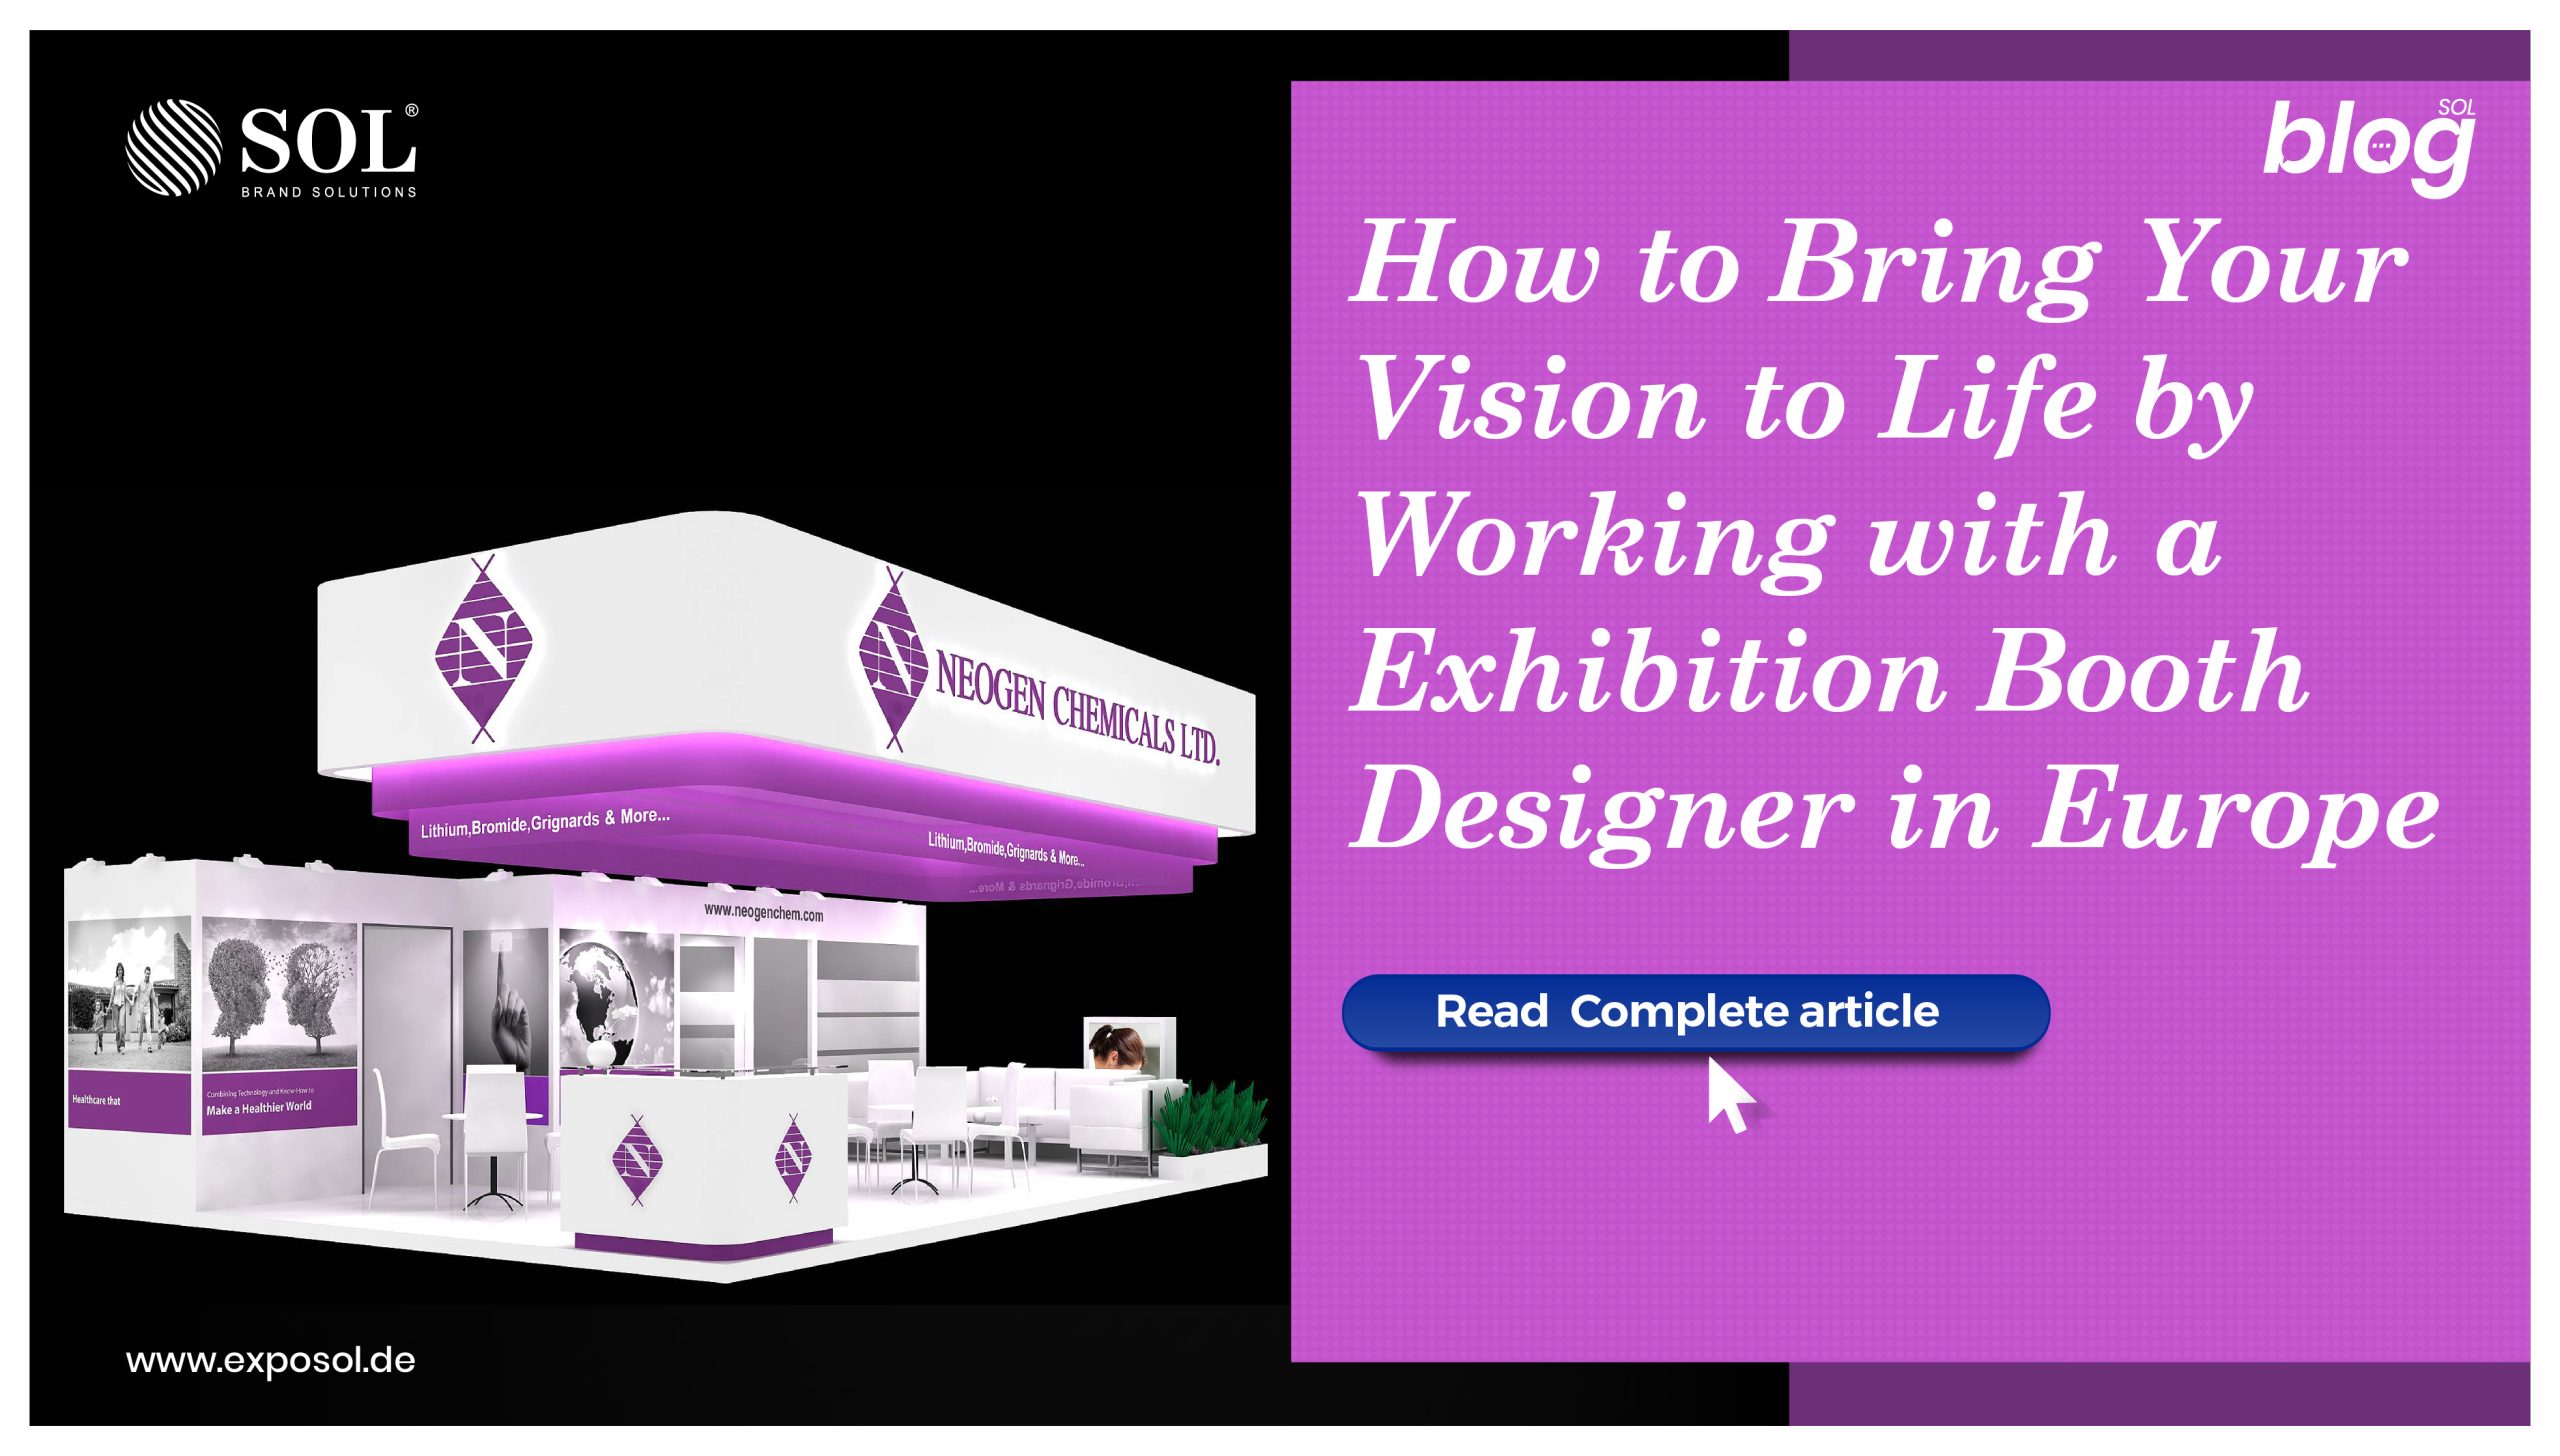 Collaborating with an Exhibition Booth Designer in Europe: How to Bring Your Vision to Life